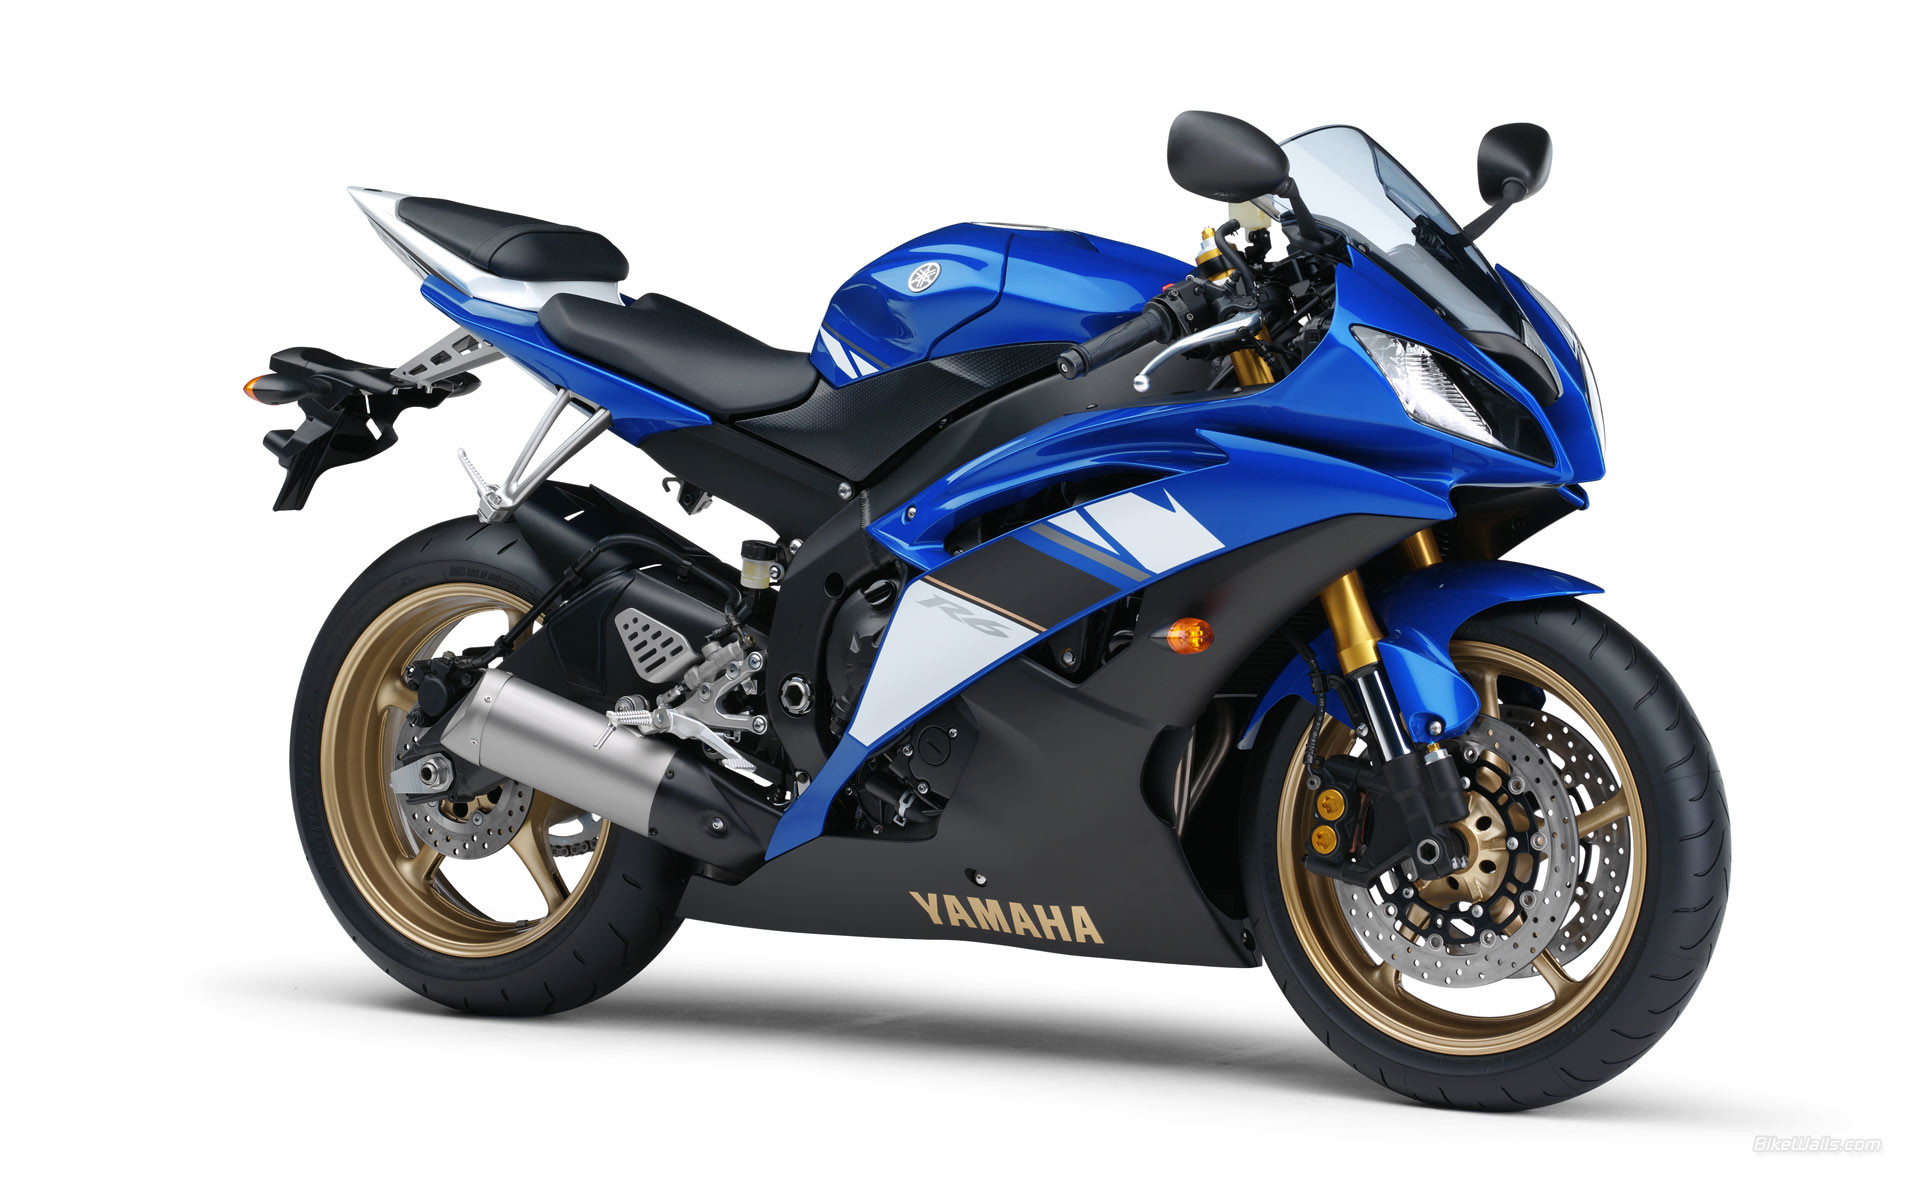 1920x1200 Image detail for -YAMAHA YZF - Motorcycles Wallpaper - Fanpop fanclubs.